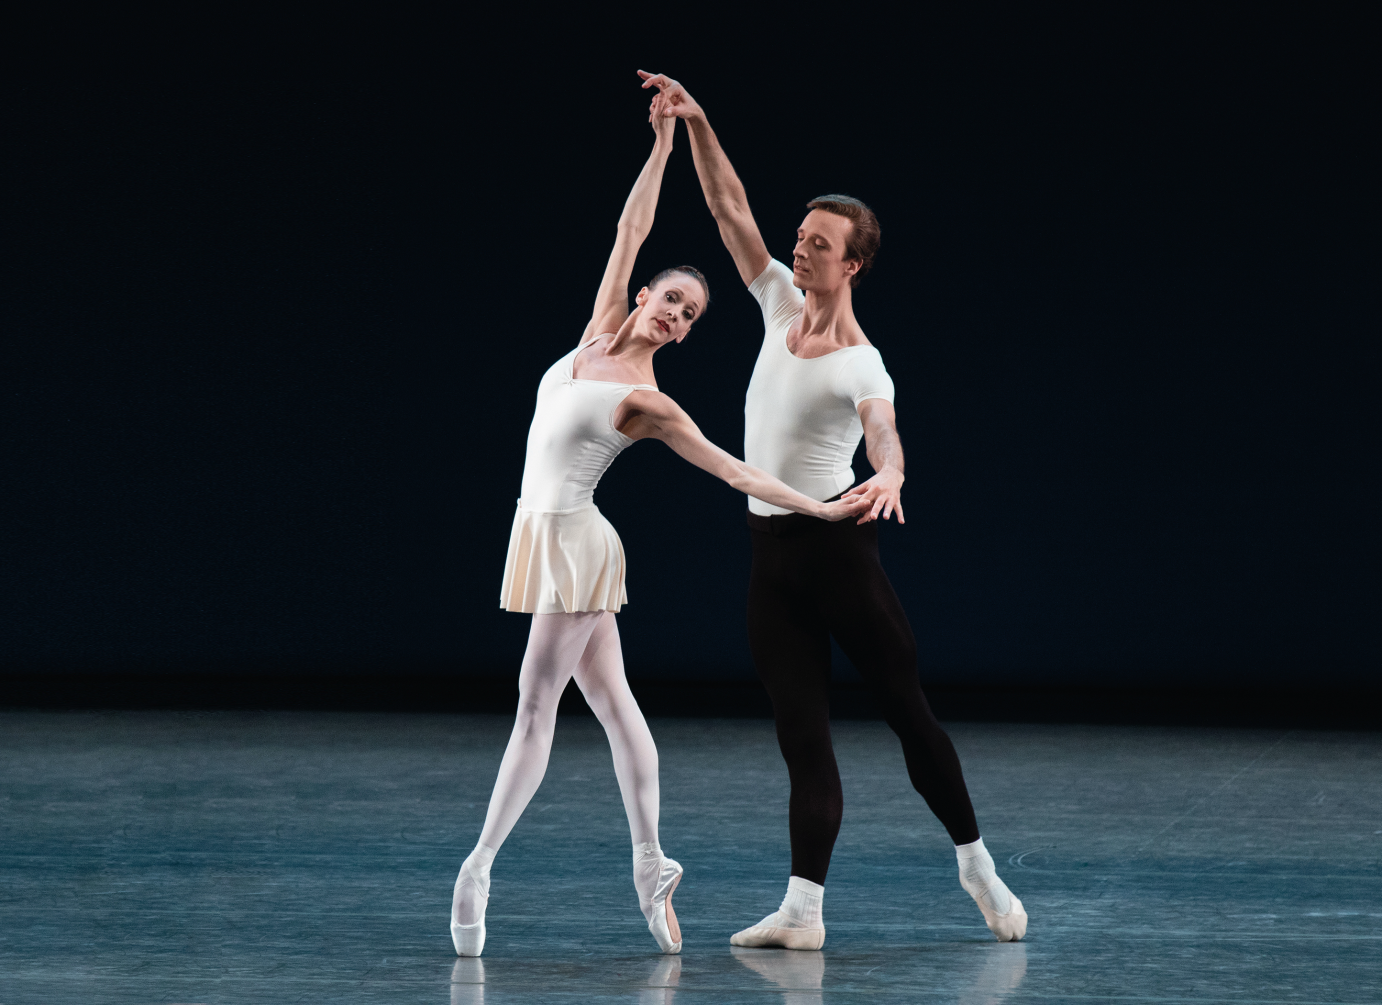 Ask la Cour stands in tendu derriere. He holds Maria Kowroski's hands. She is en pointe in fourth position.